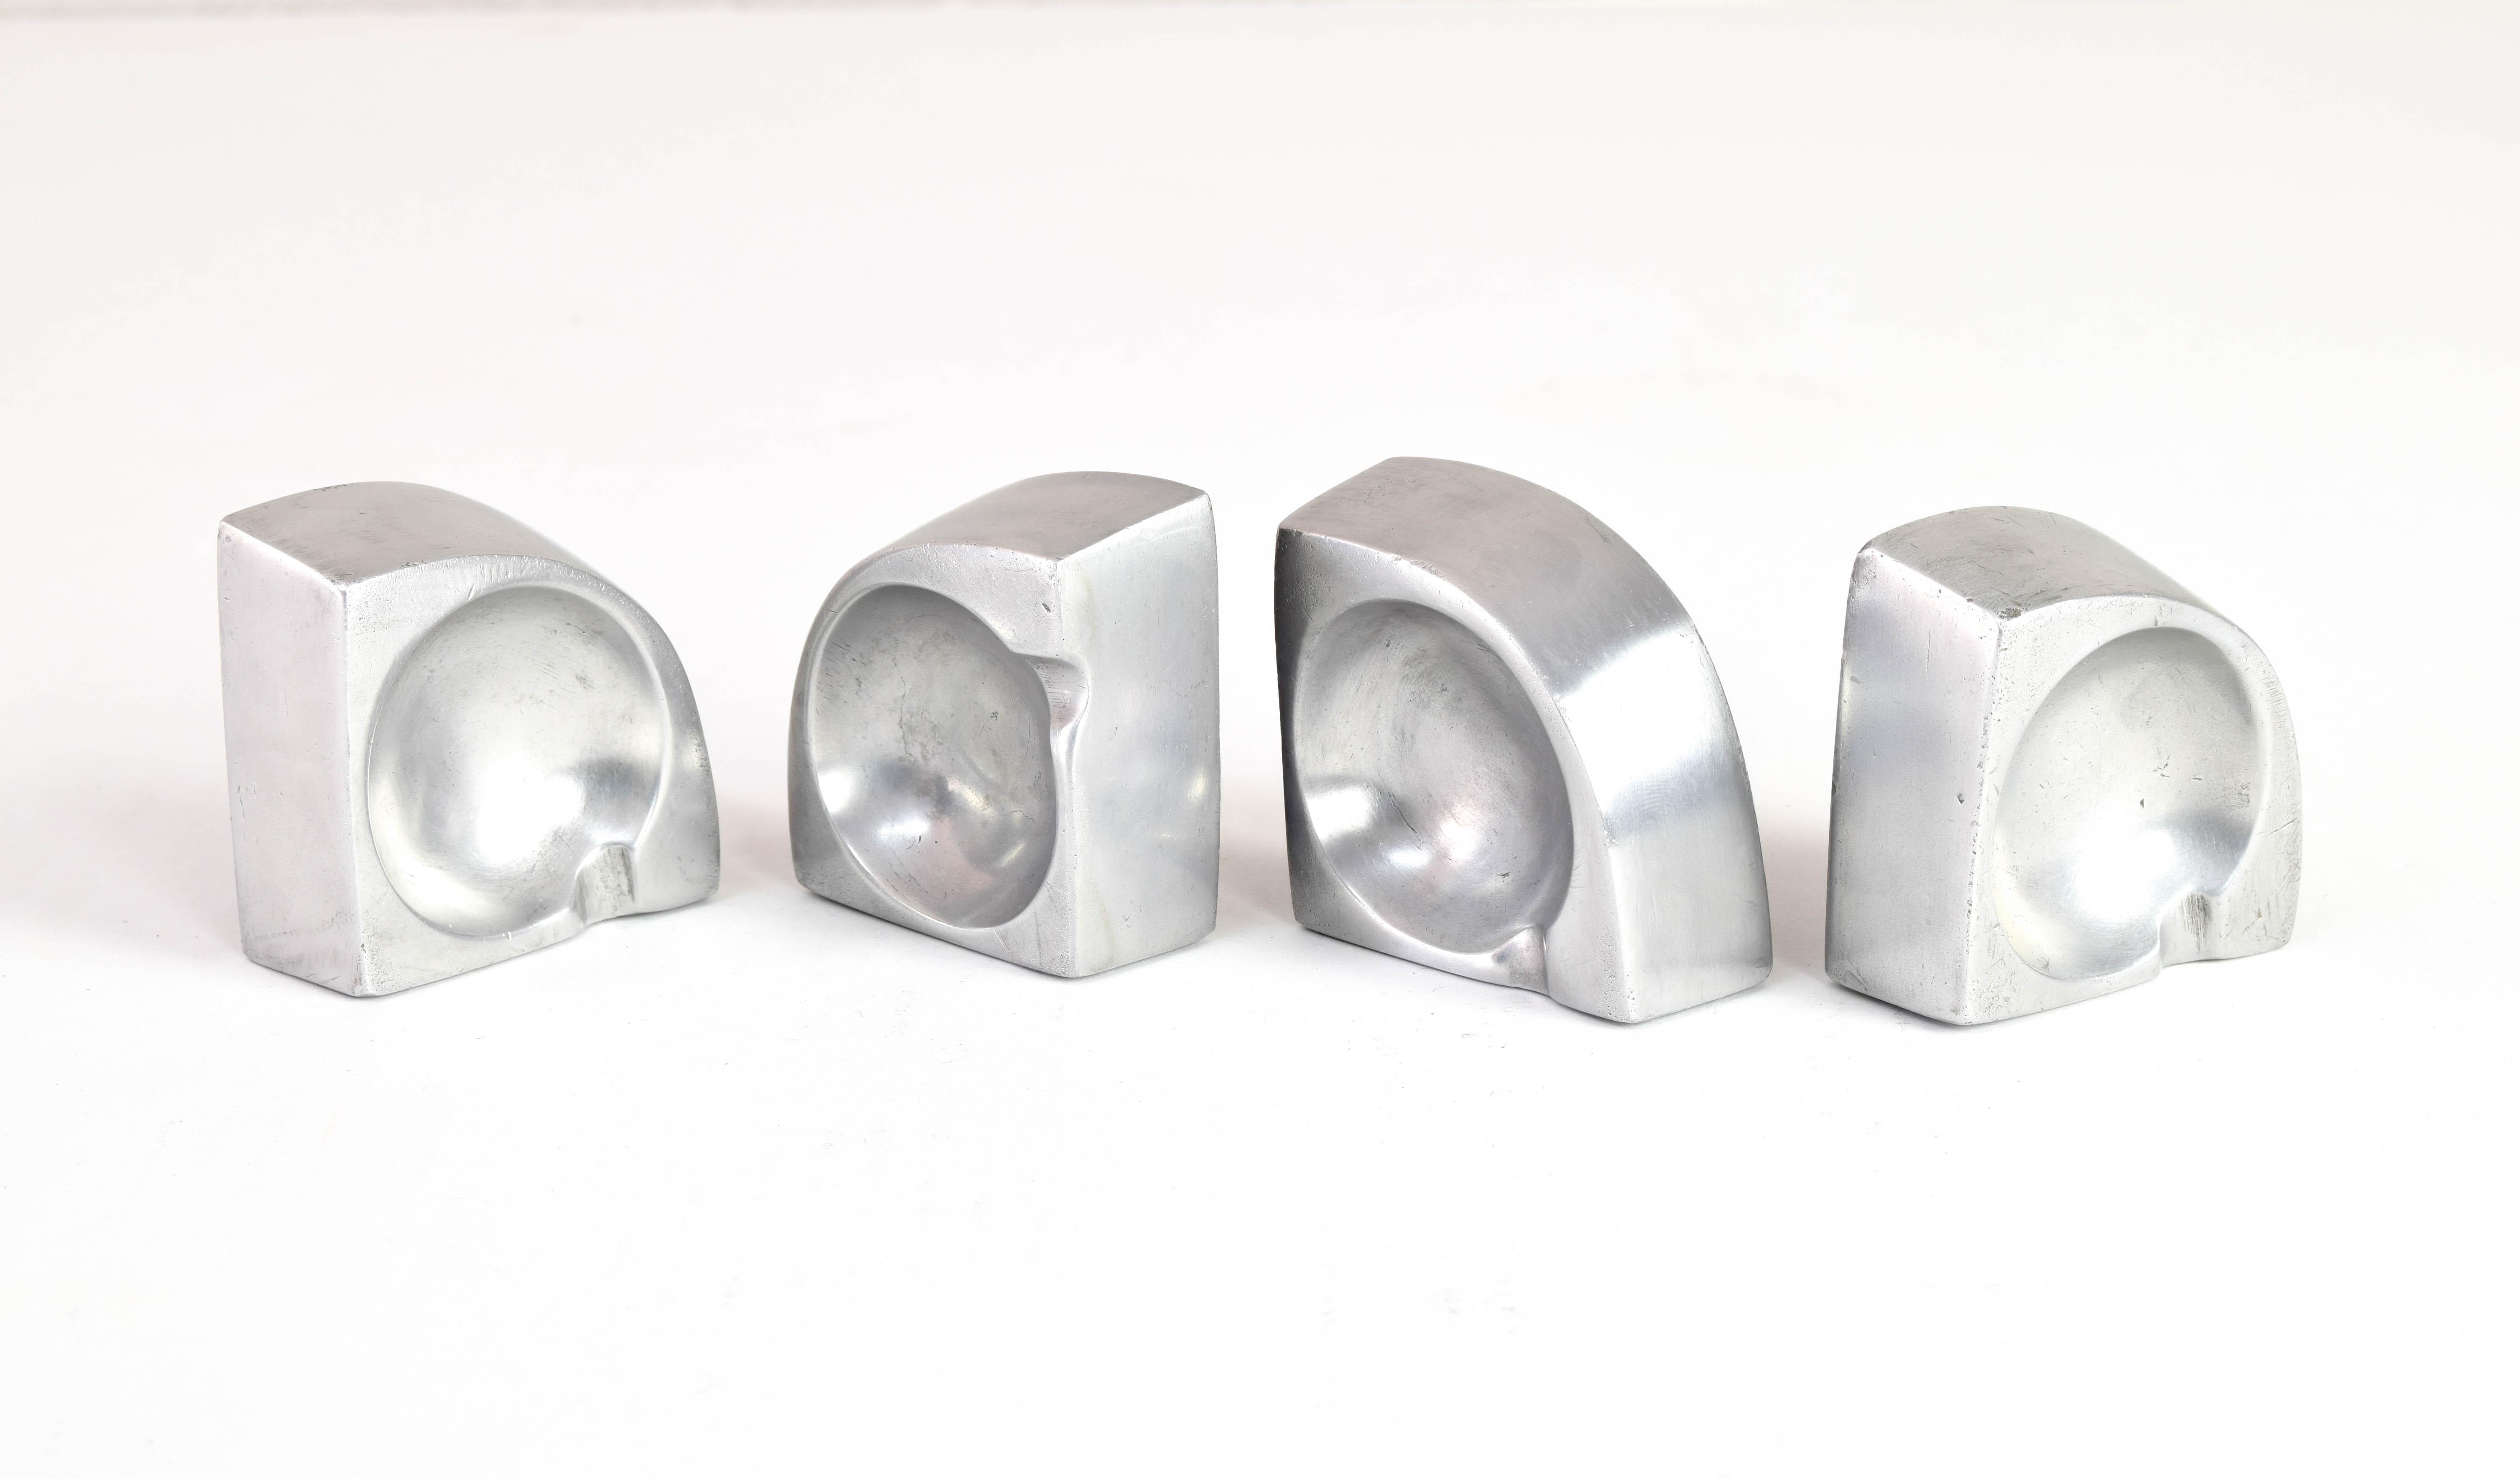 Mid Century Scandinavian Modern Handcrafted Aluminum Four Piece Ashtray, 1960 For Sale 3